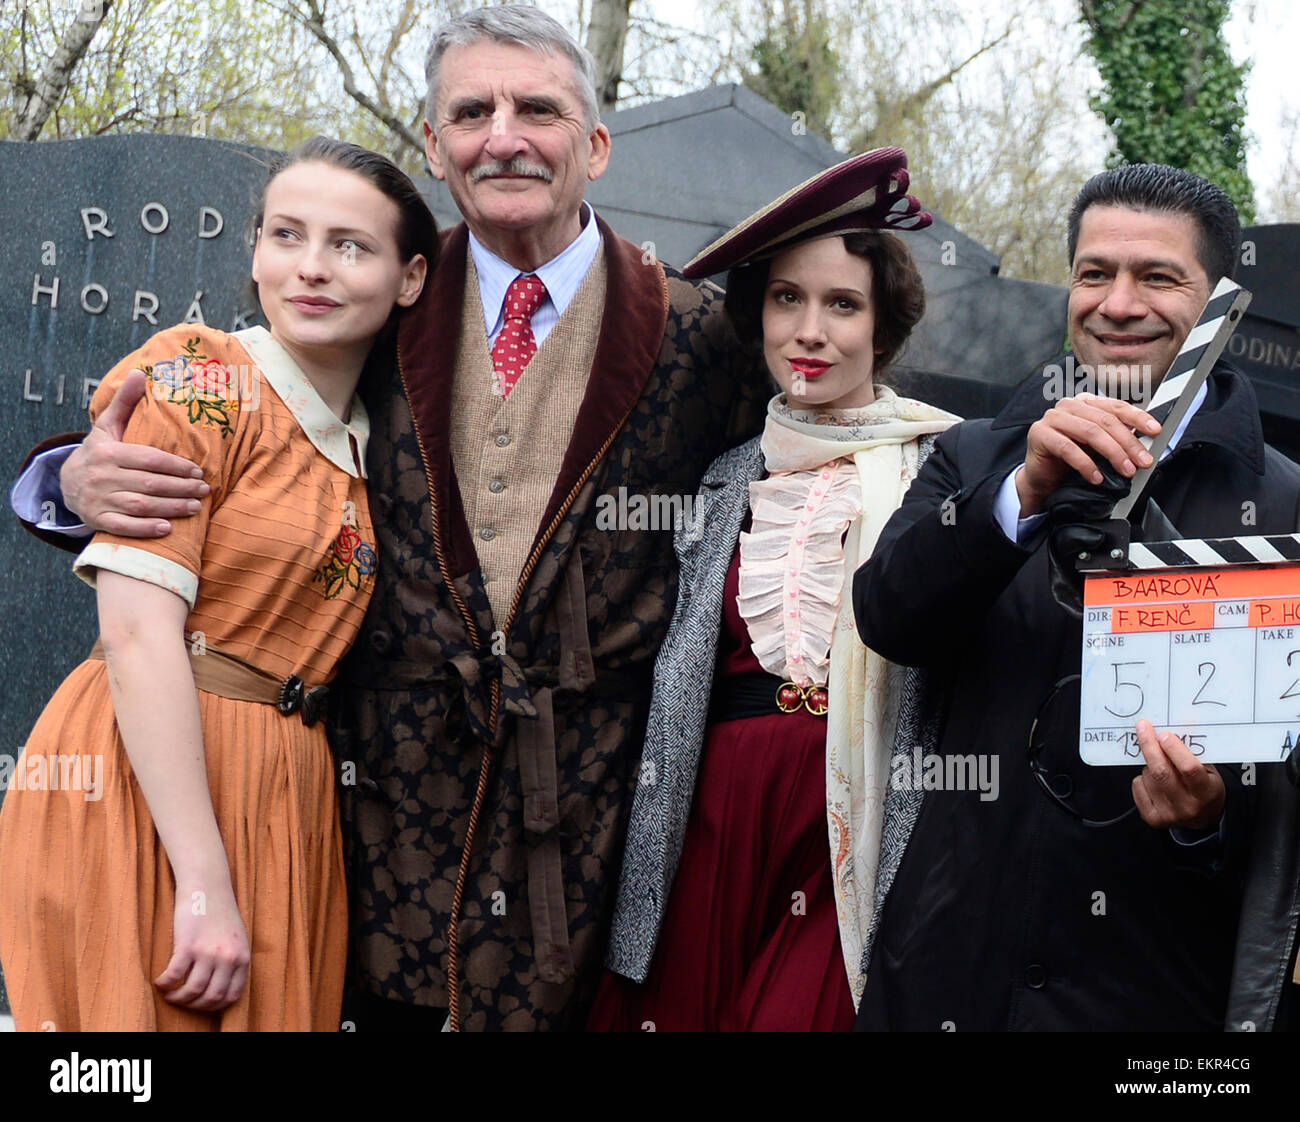 Shooting of the film about Czechoslovak film star Lida Baarova starts in the Olsany cemetary, Prague, Czech Republic, April 13, 2015. Pictured from left: Anna Fialova, Martin Huba, Tana Pauhofova and Karen Mchitarjan. The lead role in the prepared Czech film about actress Baarova, who was mistress of Nazi Germany´s Propaganda Minister Joseph Goebbels before the war, will play Slovak actress Tana Pauhofova. Austrian actor Karl Markovics will play Goebbels, while one of the most famous German actors, Gedeon Burkhard, was cast for the role of actor Gustav Froehlich, who was Baarova´s partner both Stock Photo